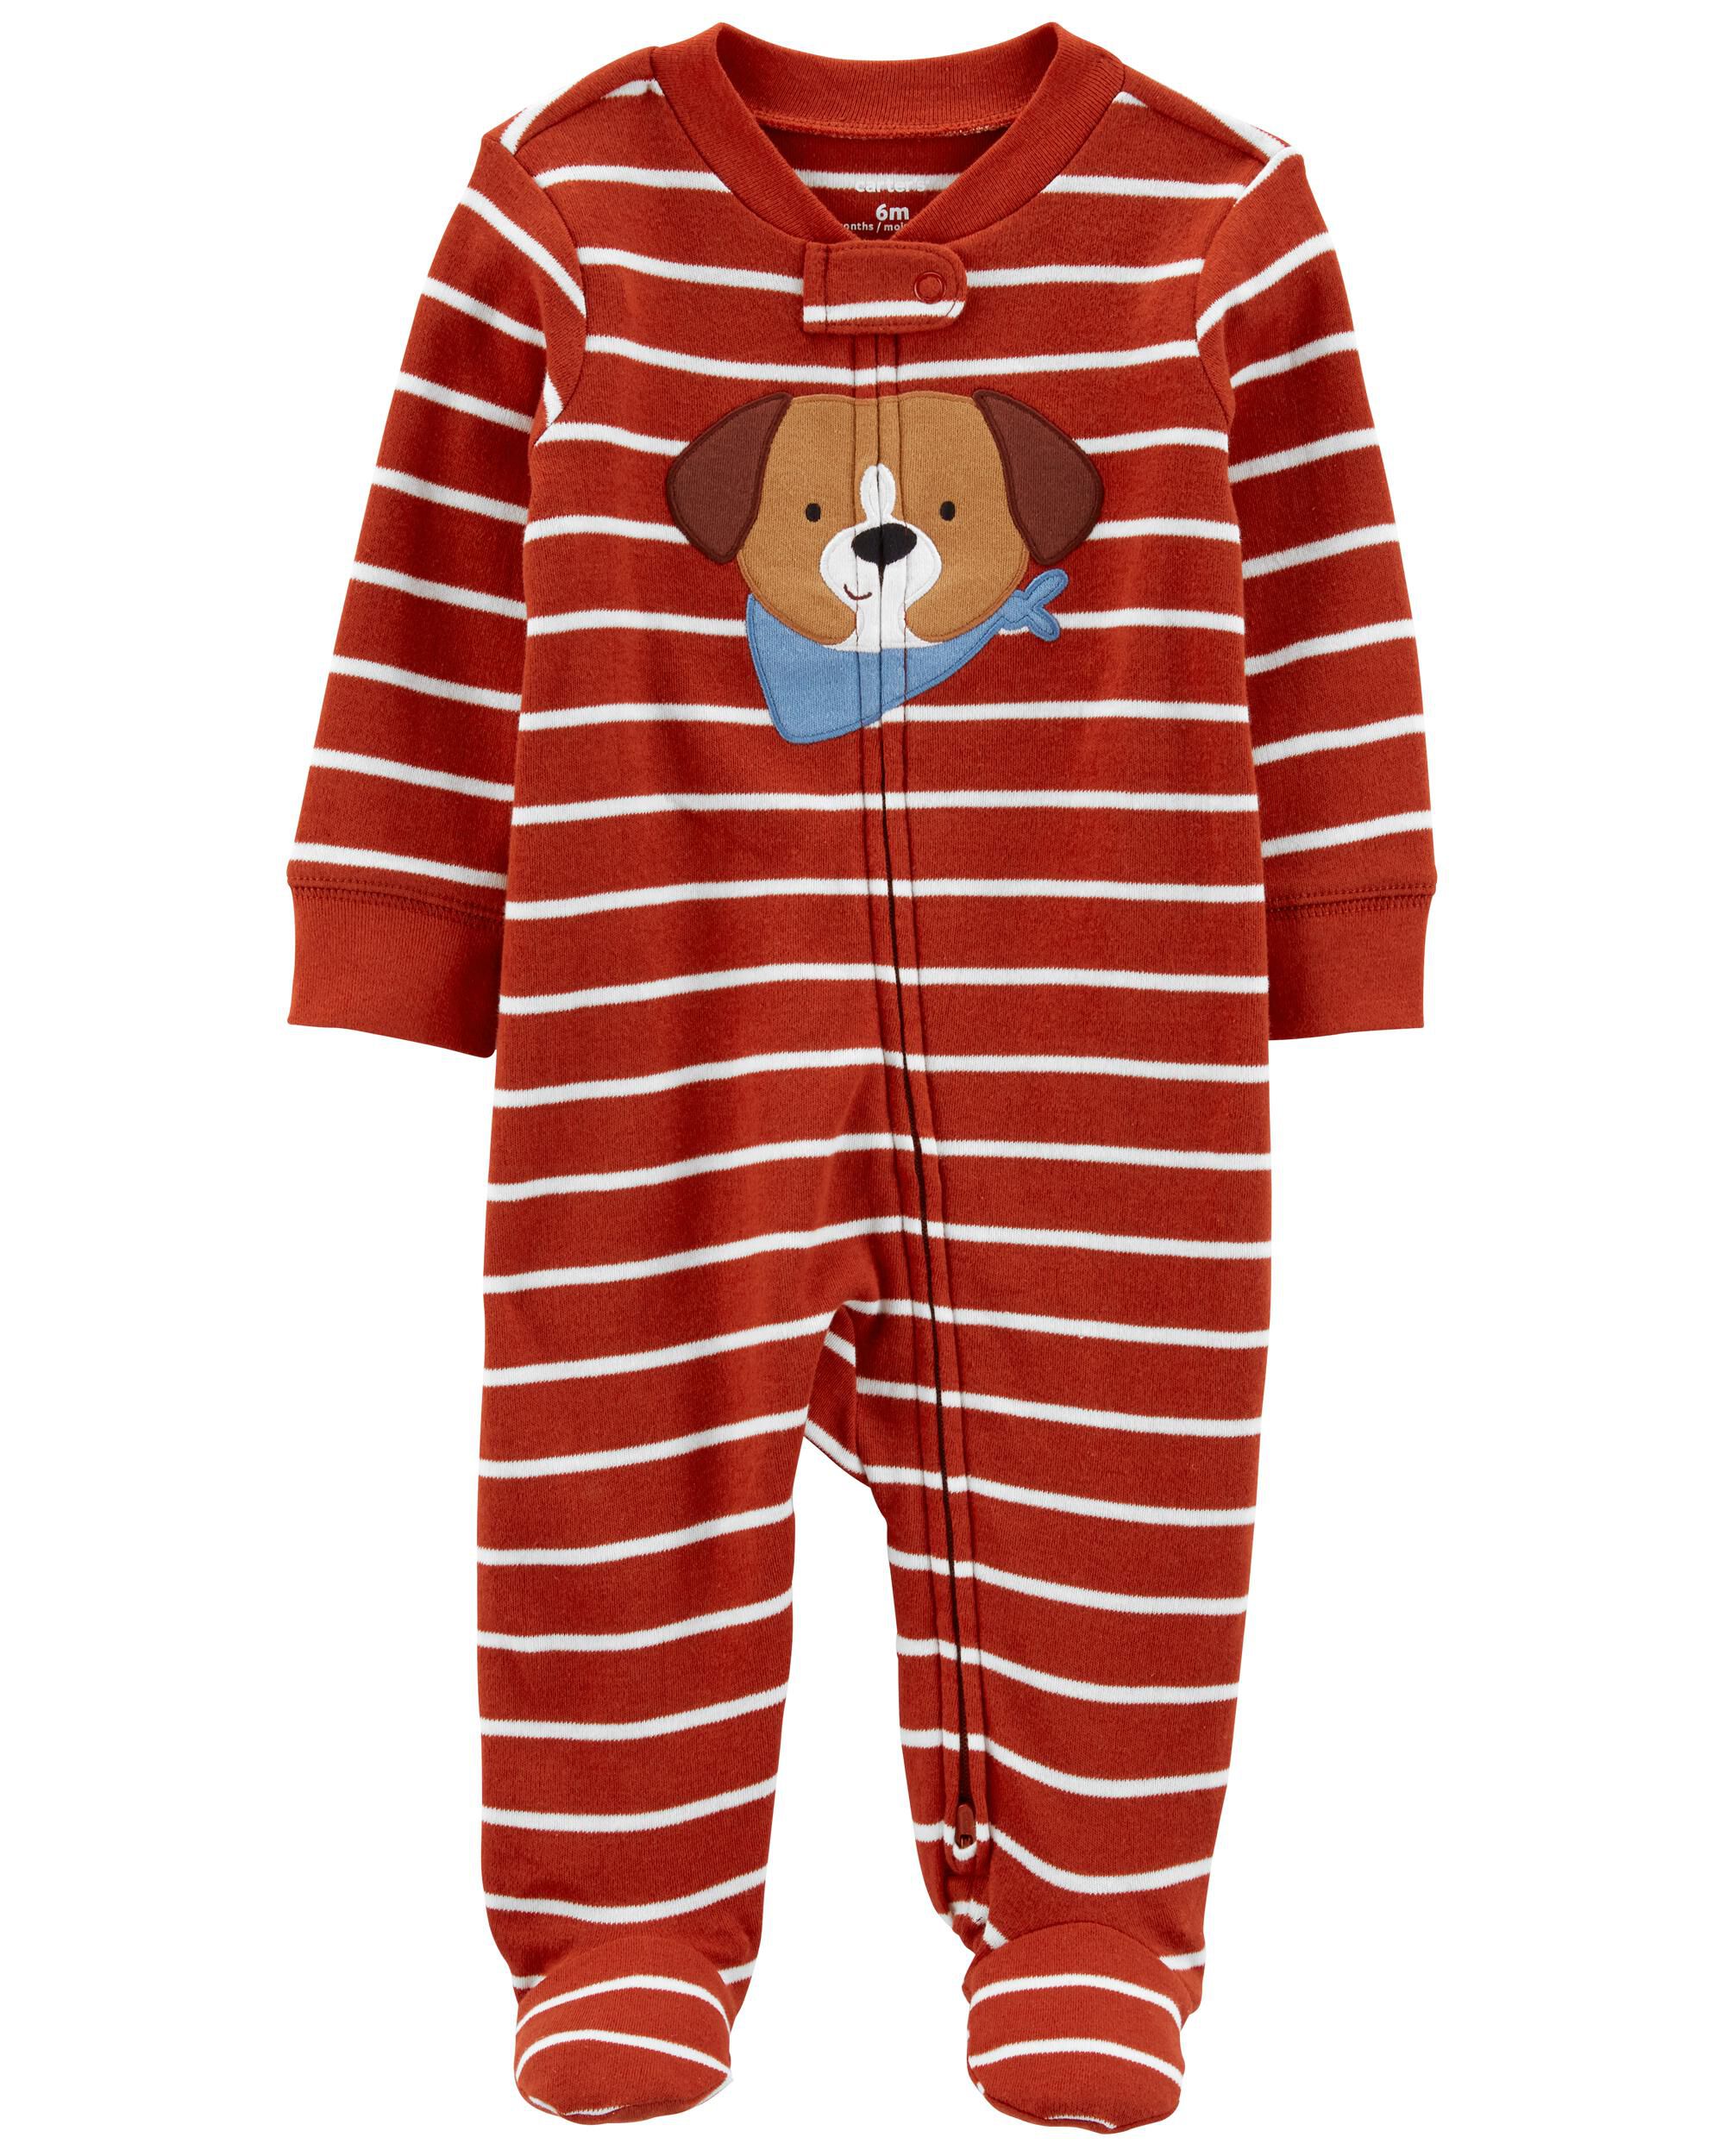 Details about   Carter’s boys 9m sleeper pajamas. 